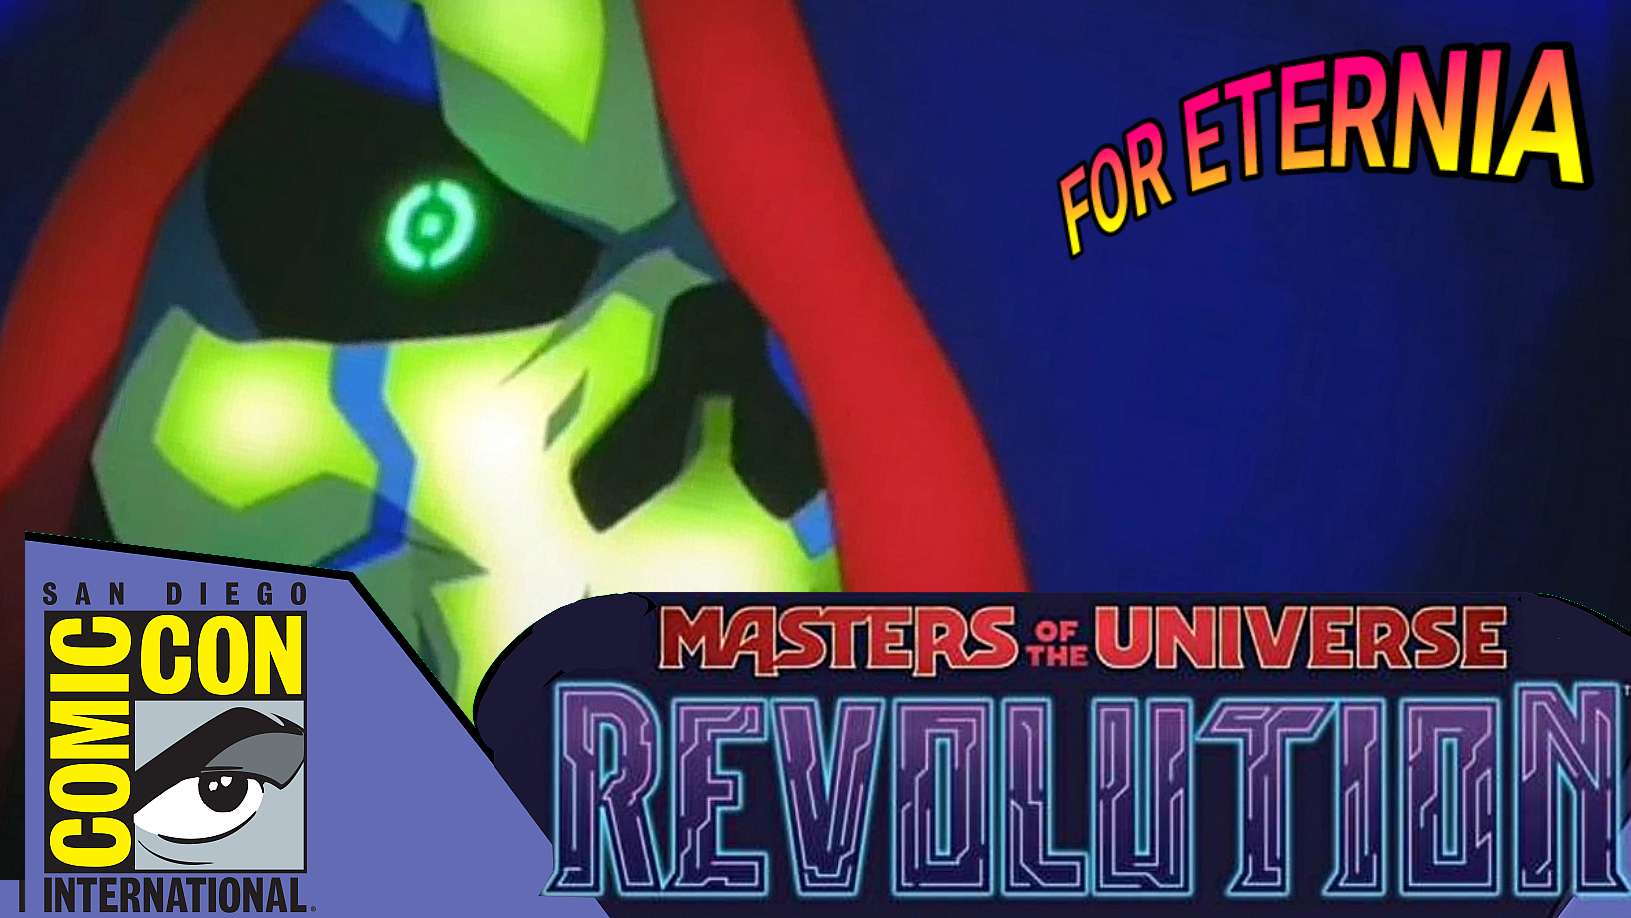 Watch some clip animation from ”Masters of the Universe: Revolution”